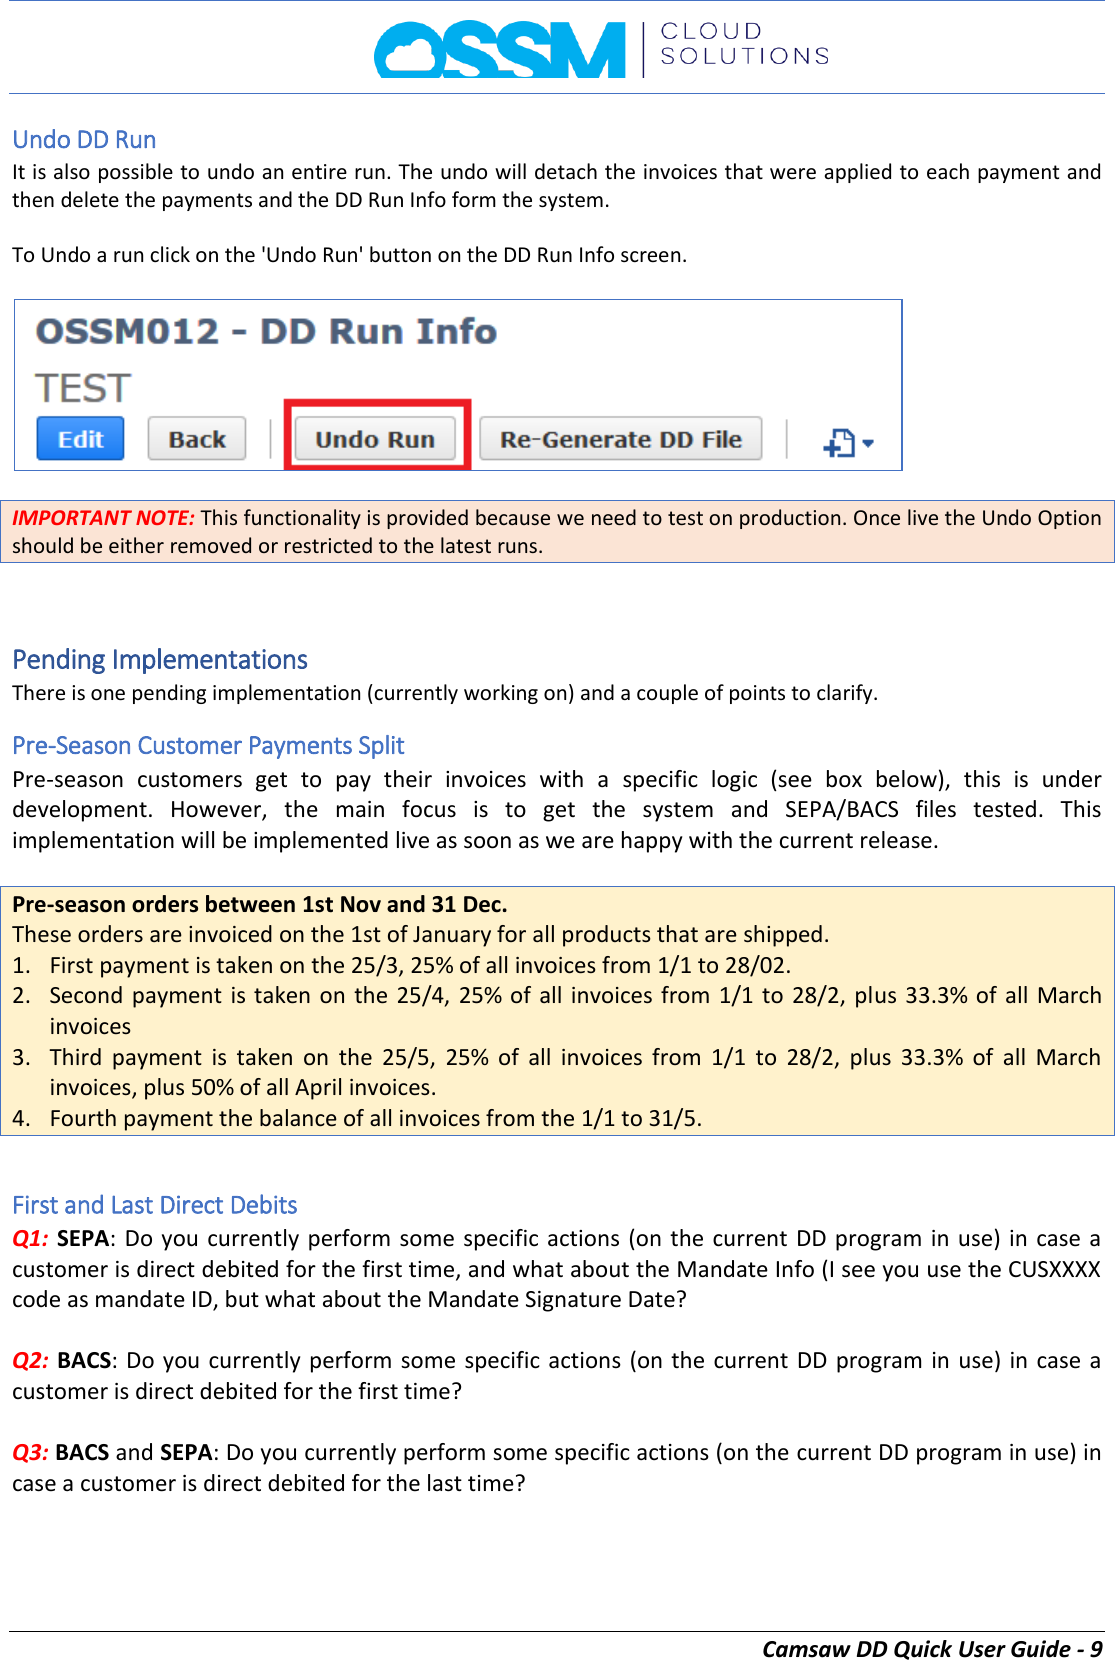 Page 9 of 9 - OSSM012 - Quick Guide V1.5